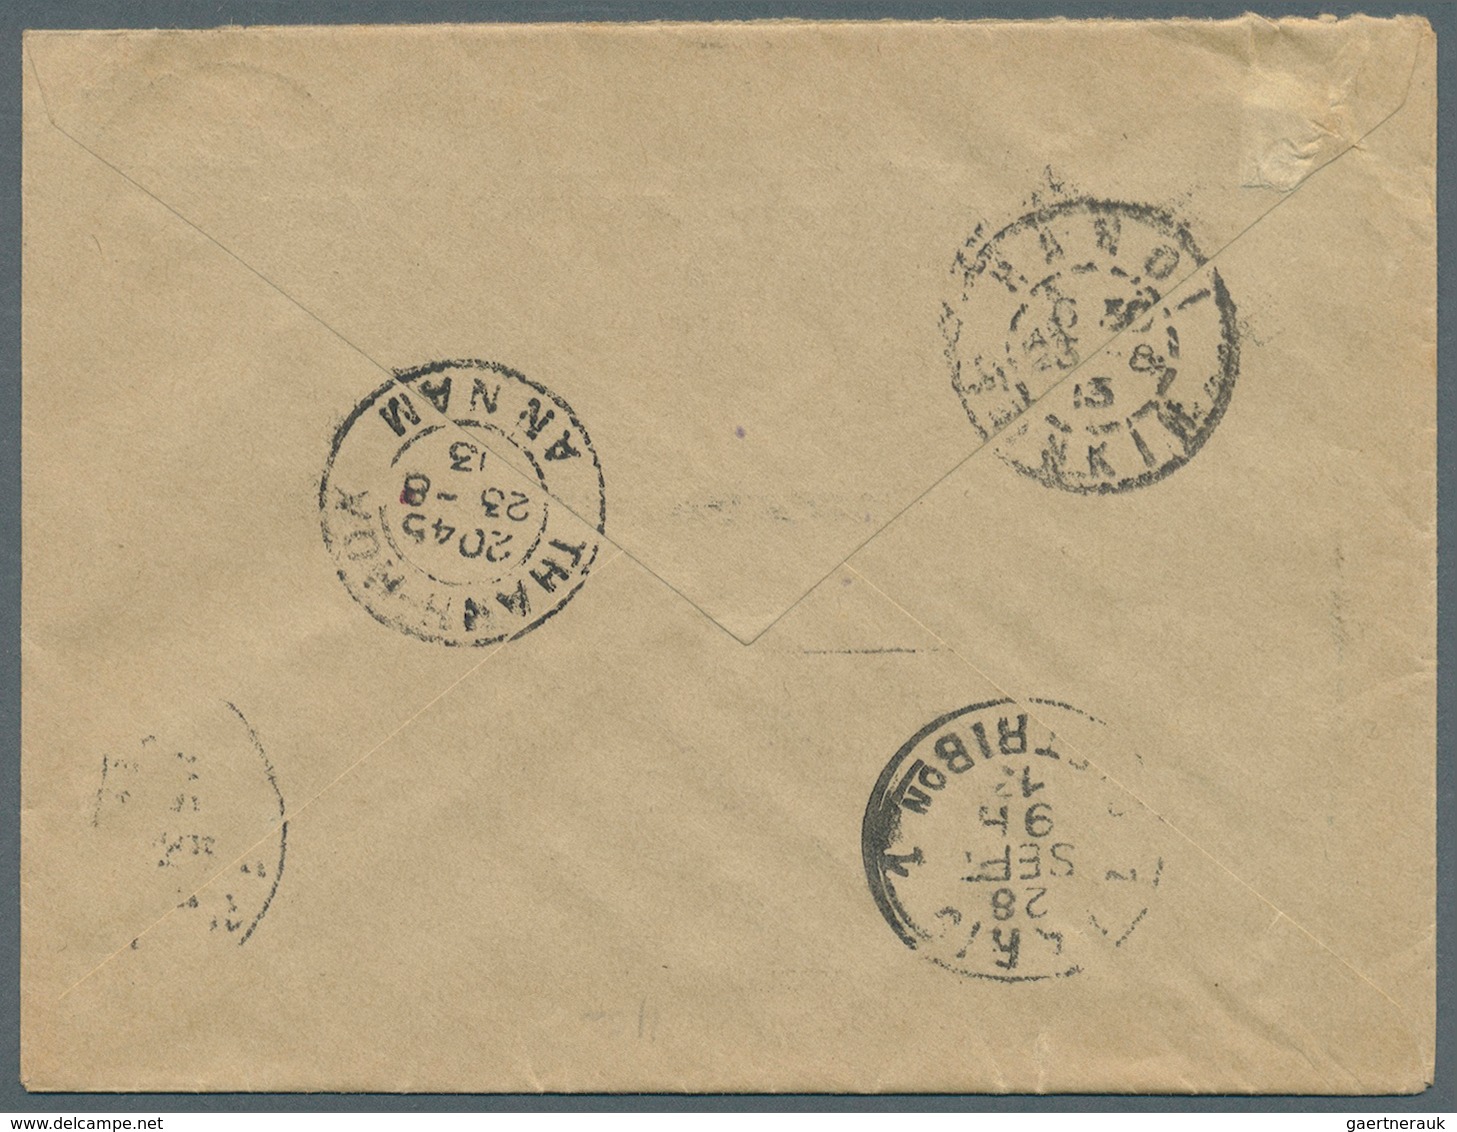 Französisch-Indochina: 1913. Postal Stationery Envelope 10c Red Addressed To Paris Cancelled By 'Pos - Covers & Documents